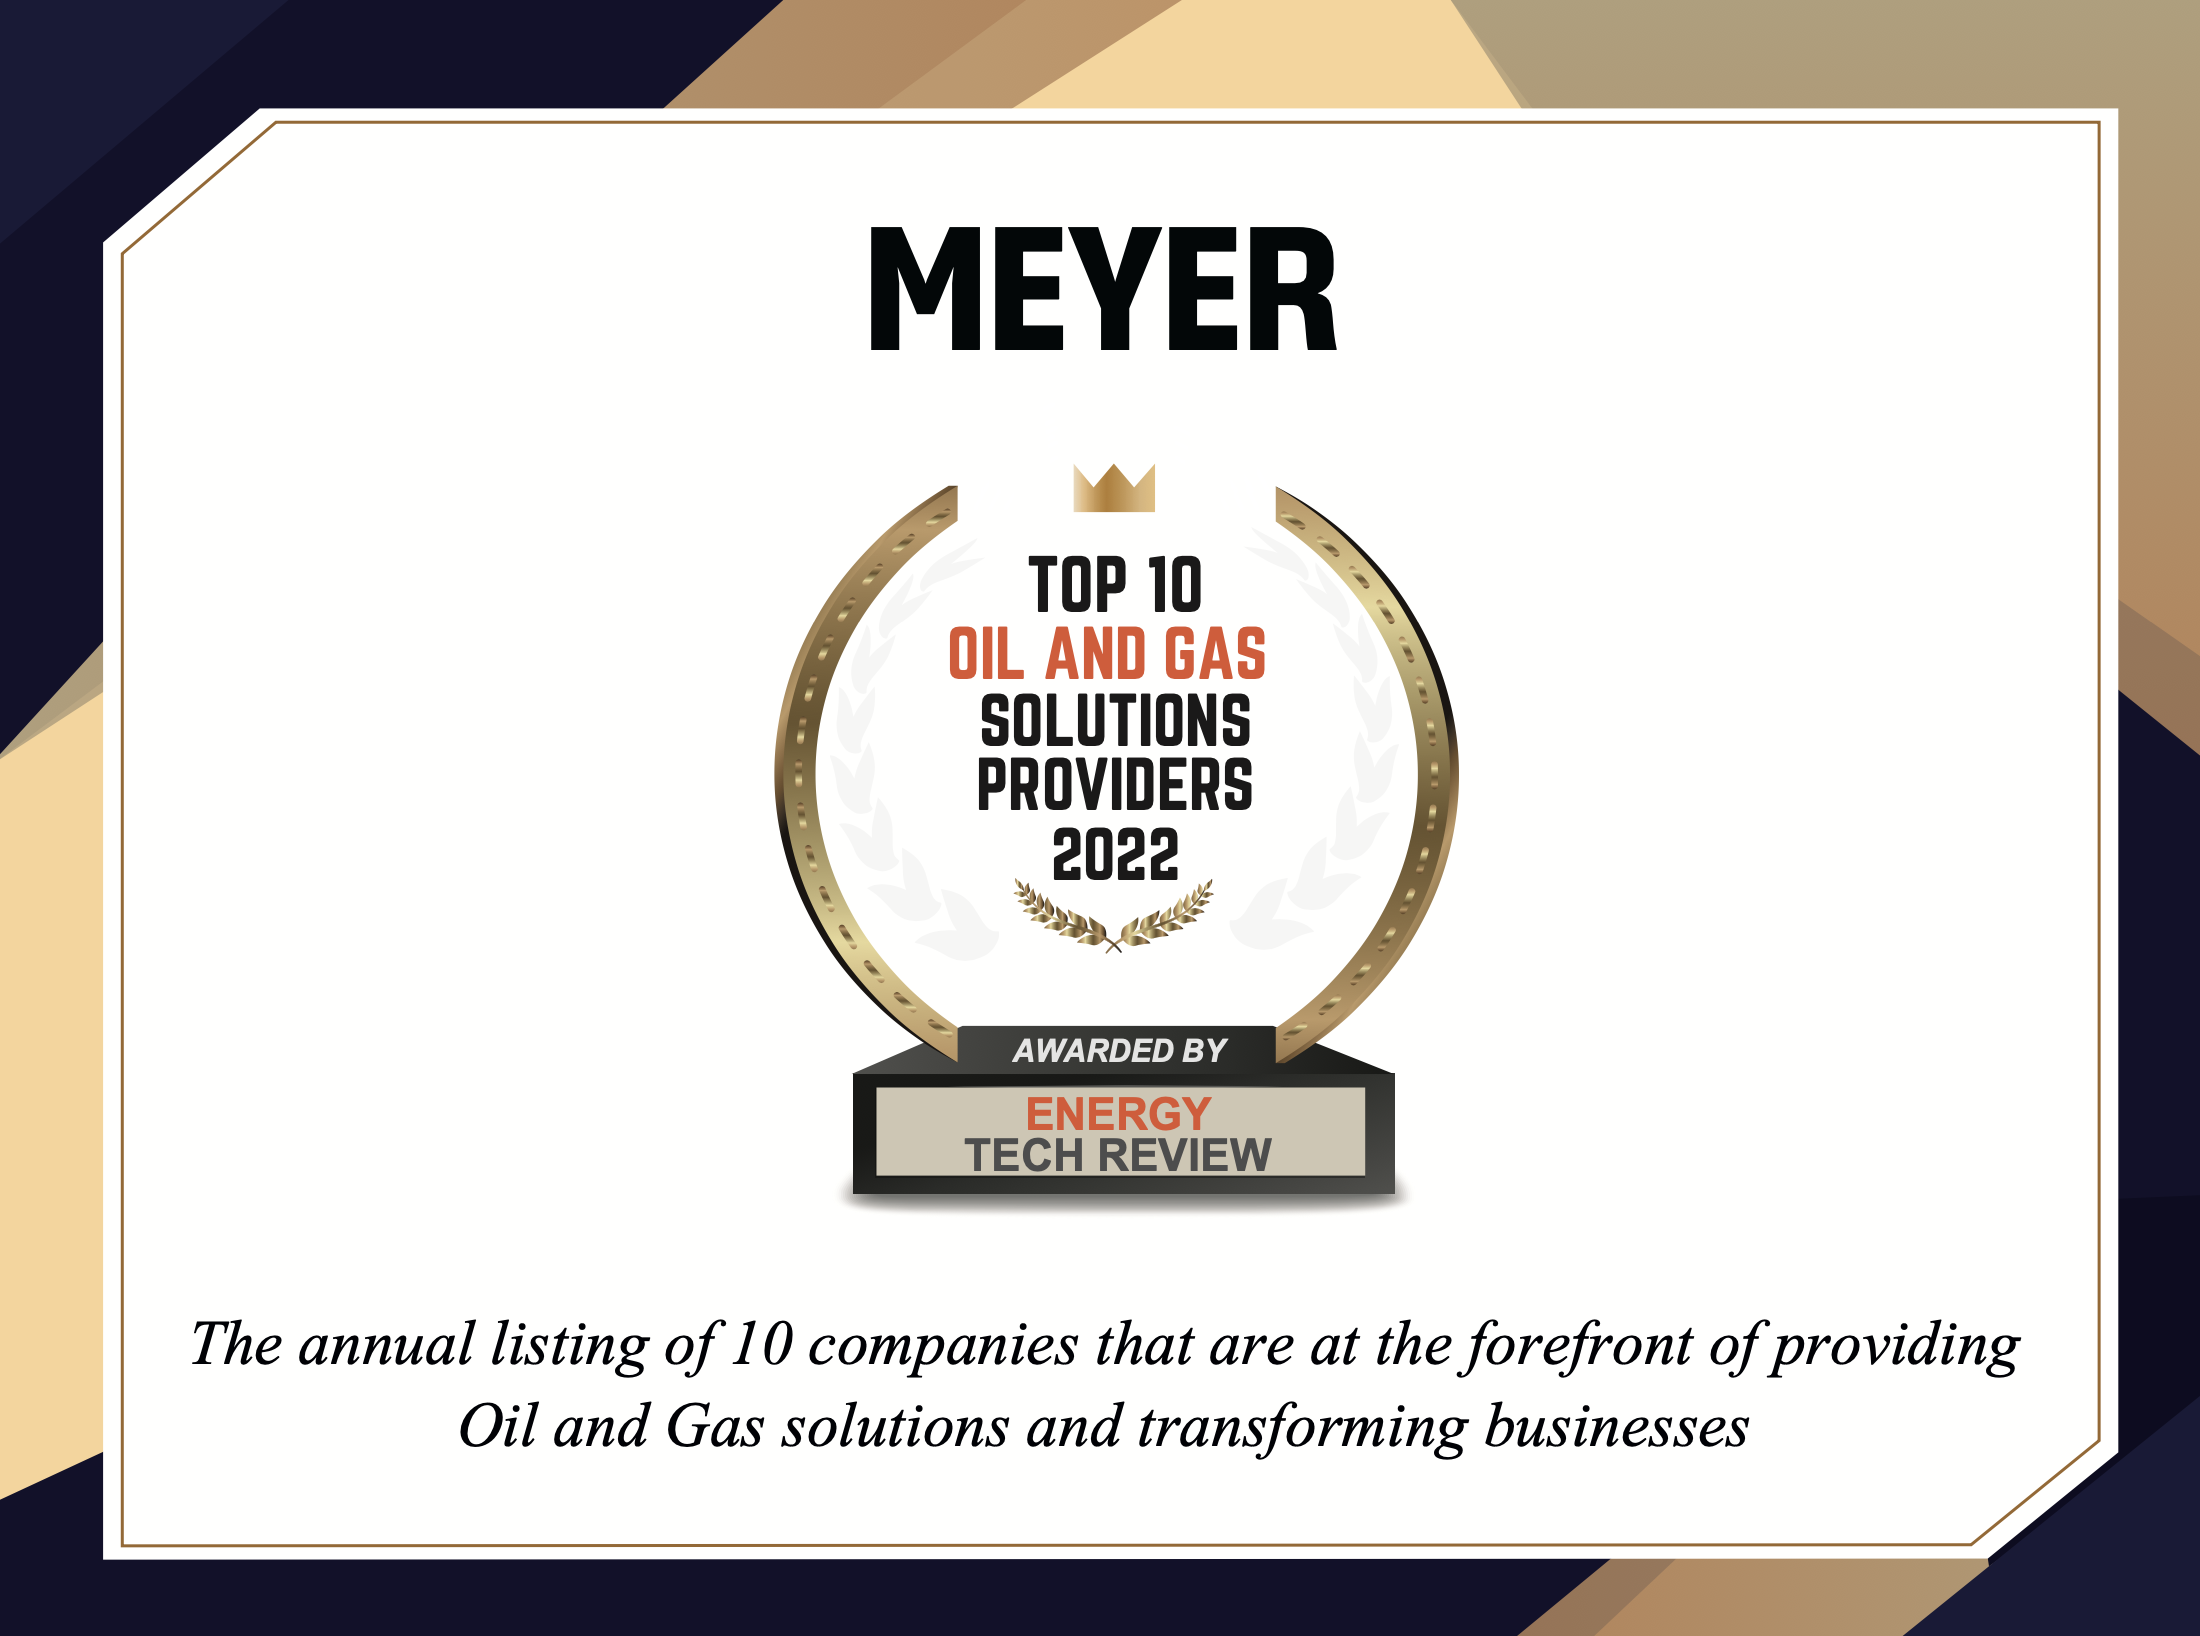 MEYER recognized for its outstanding Oil and Gas Solutions